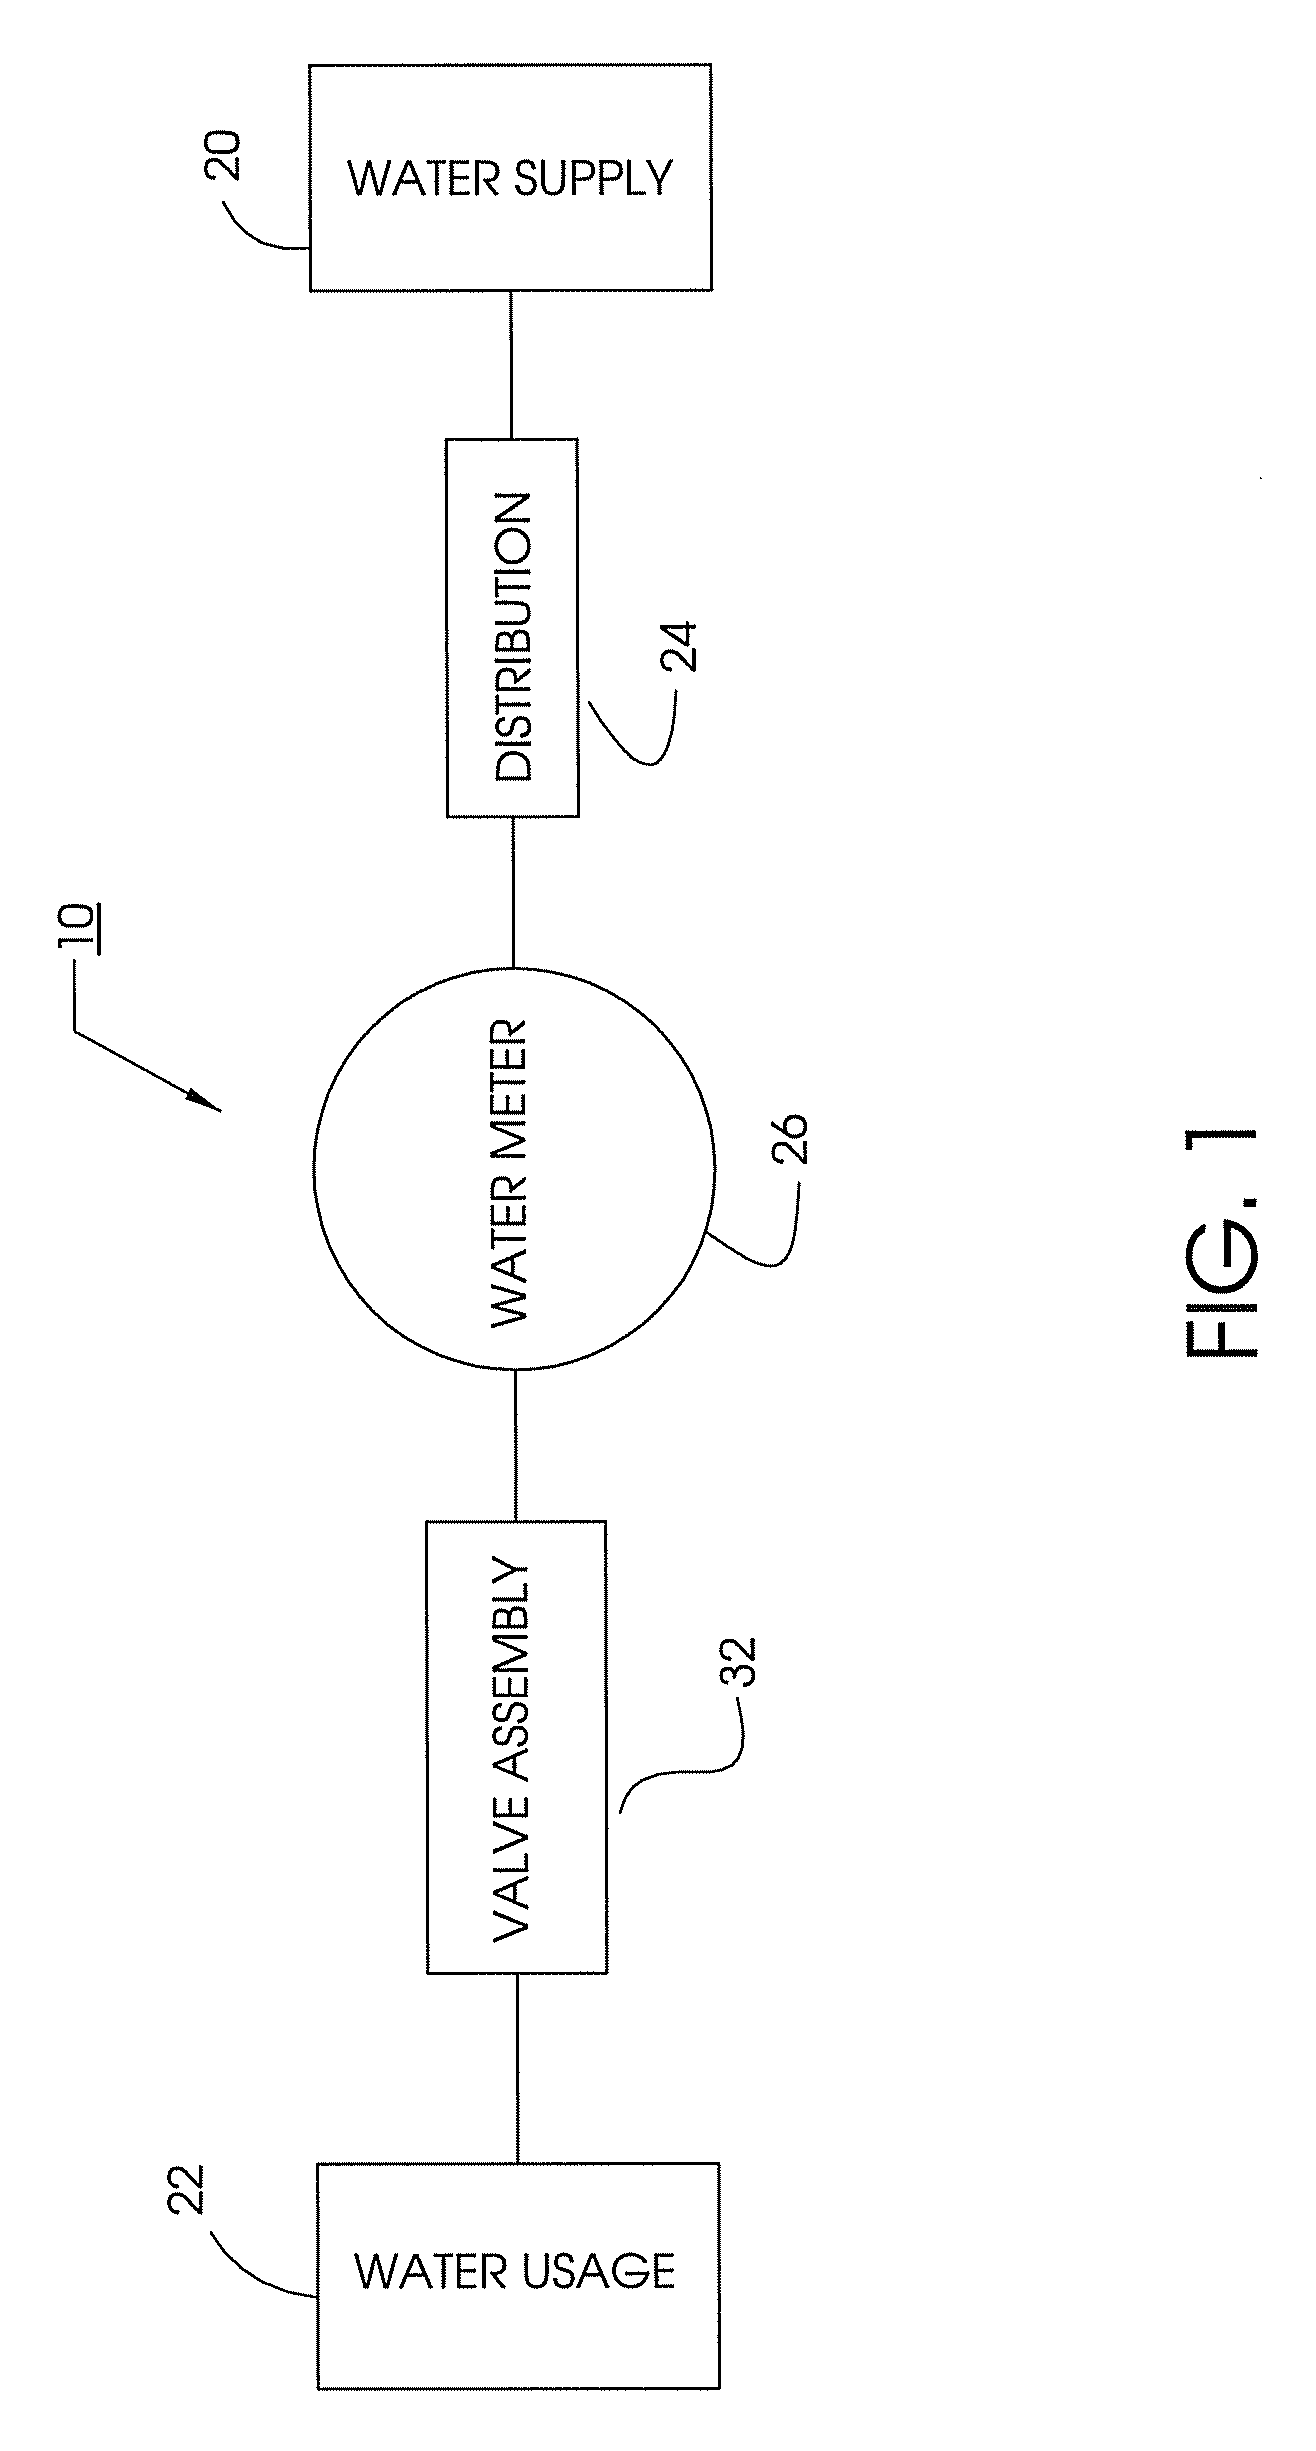 System for increasing the efficiency of a water meter